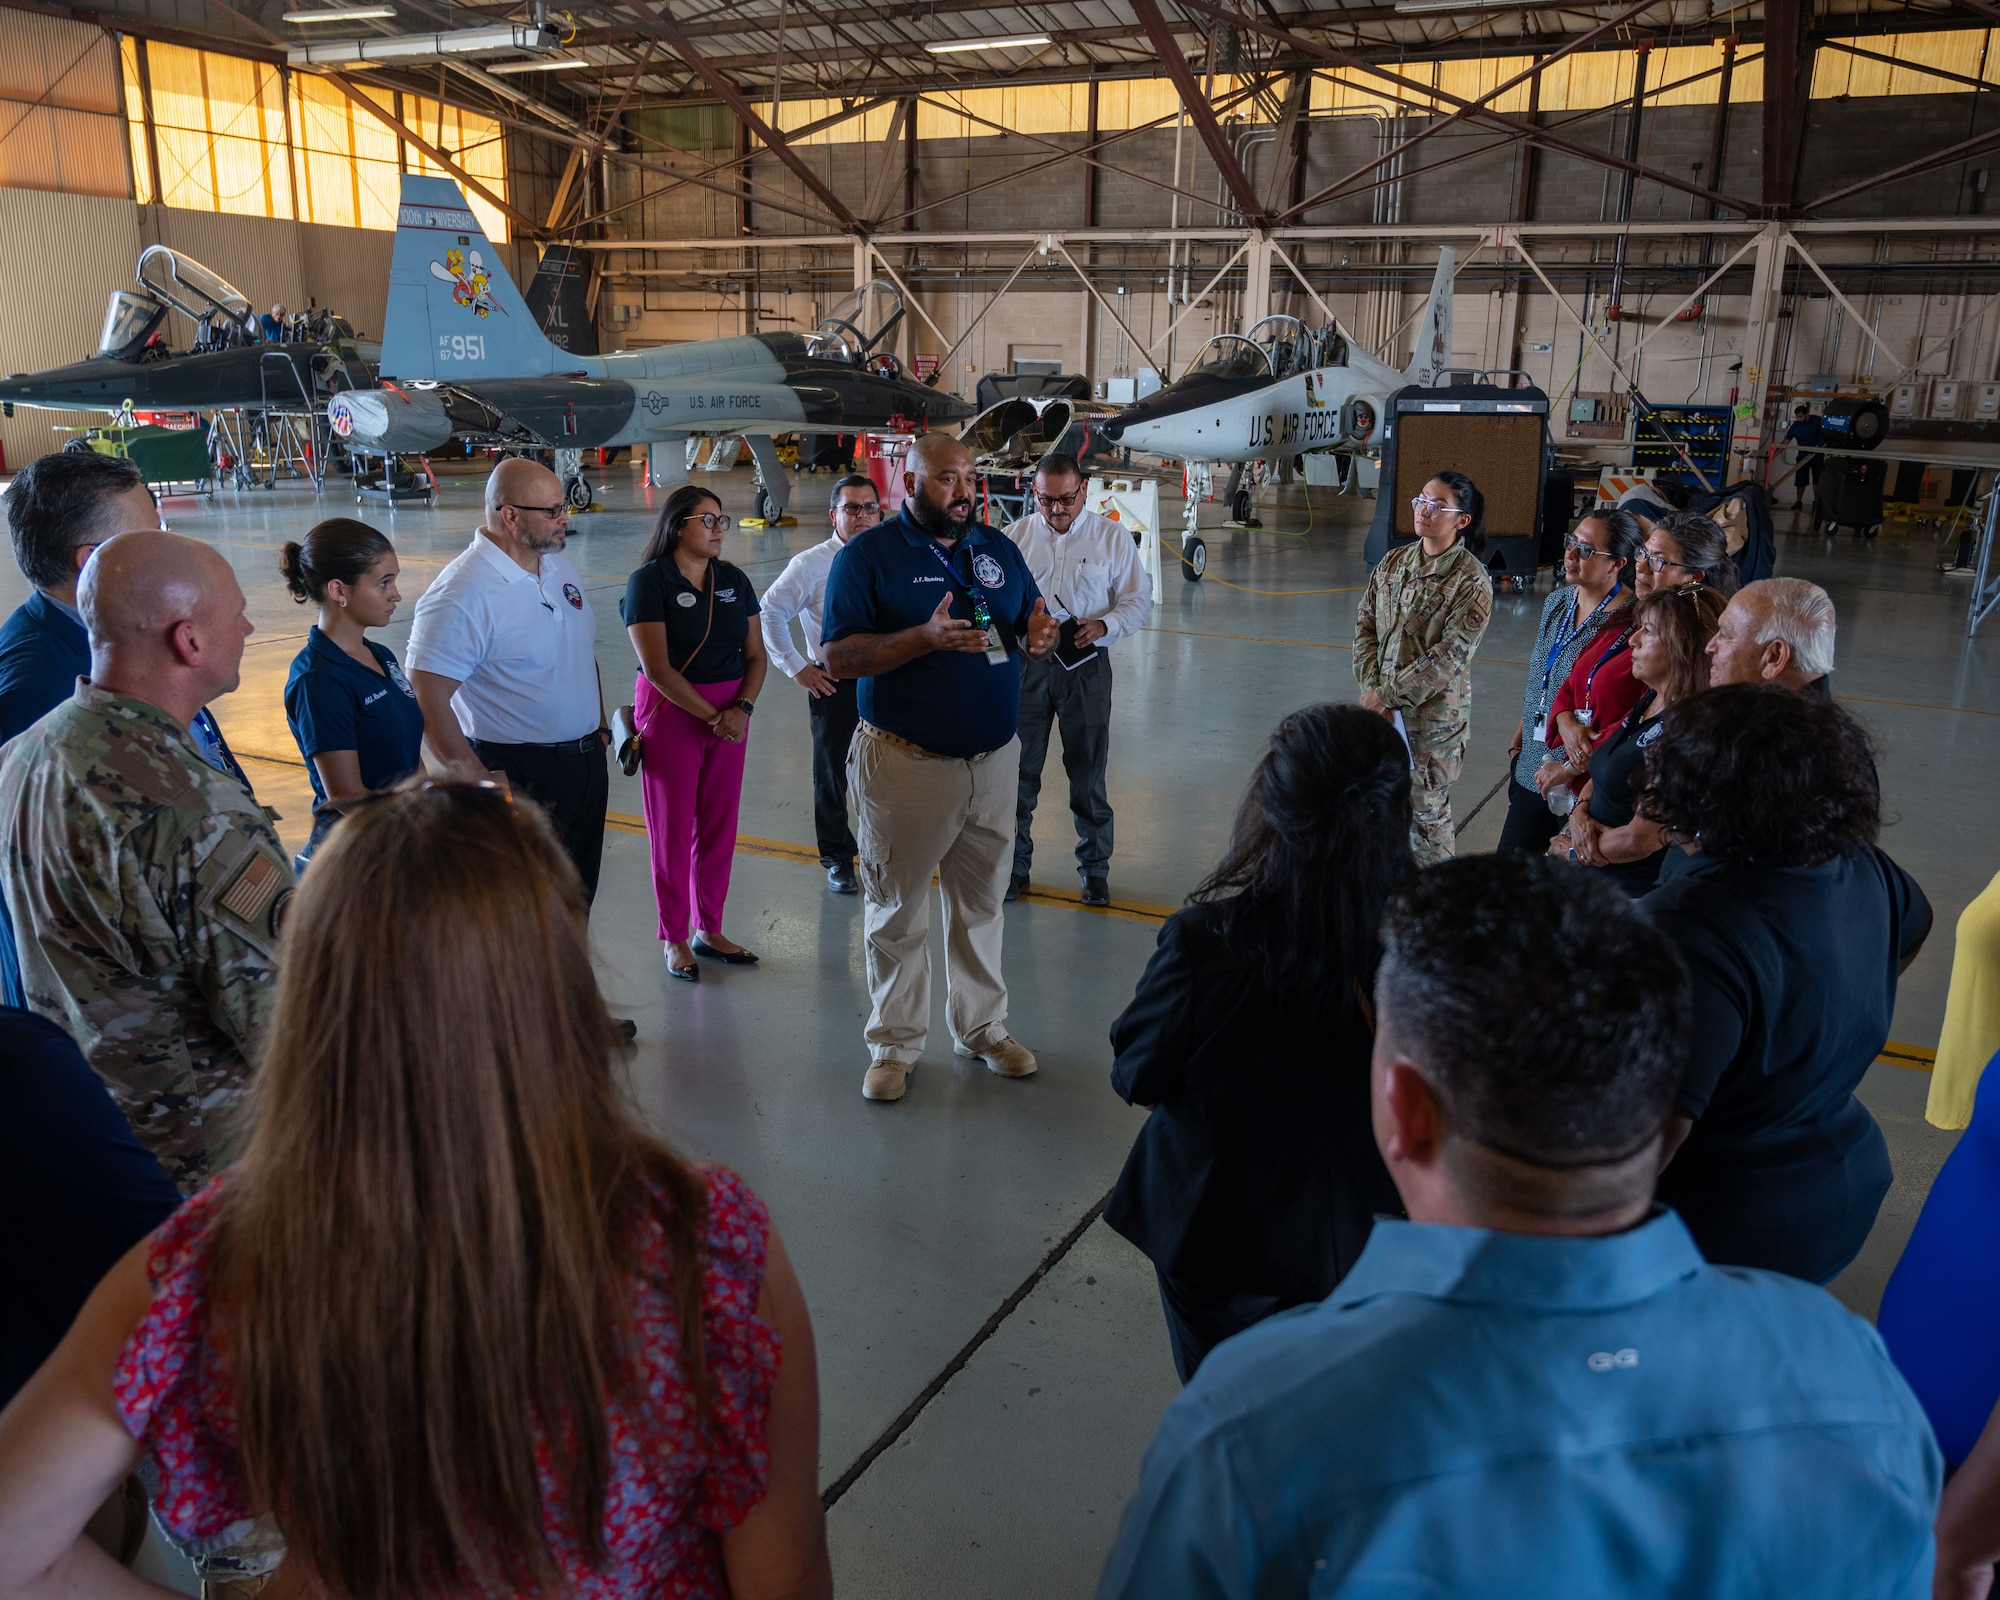 Joe Frank Ramirez, Career and Technical Education director, discusses the merits of the Grow Your Own program at Laughlin Air Force Base, Texas, July 18, 2023. The Grow Your Own program allows Laughlin to reach out to the local community and provide experience to high schoolers interested in joining the military or the government civilian workforce. During their time at Laughlin, program attendees are partnered up with an experienced supervisor, who shows them how to do the tasks assigned to them. (U.S. Air Force photo by Senior Airman Nicholas Larsen)